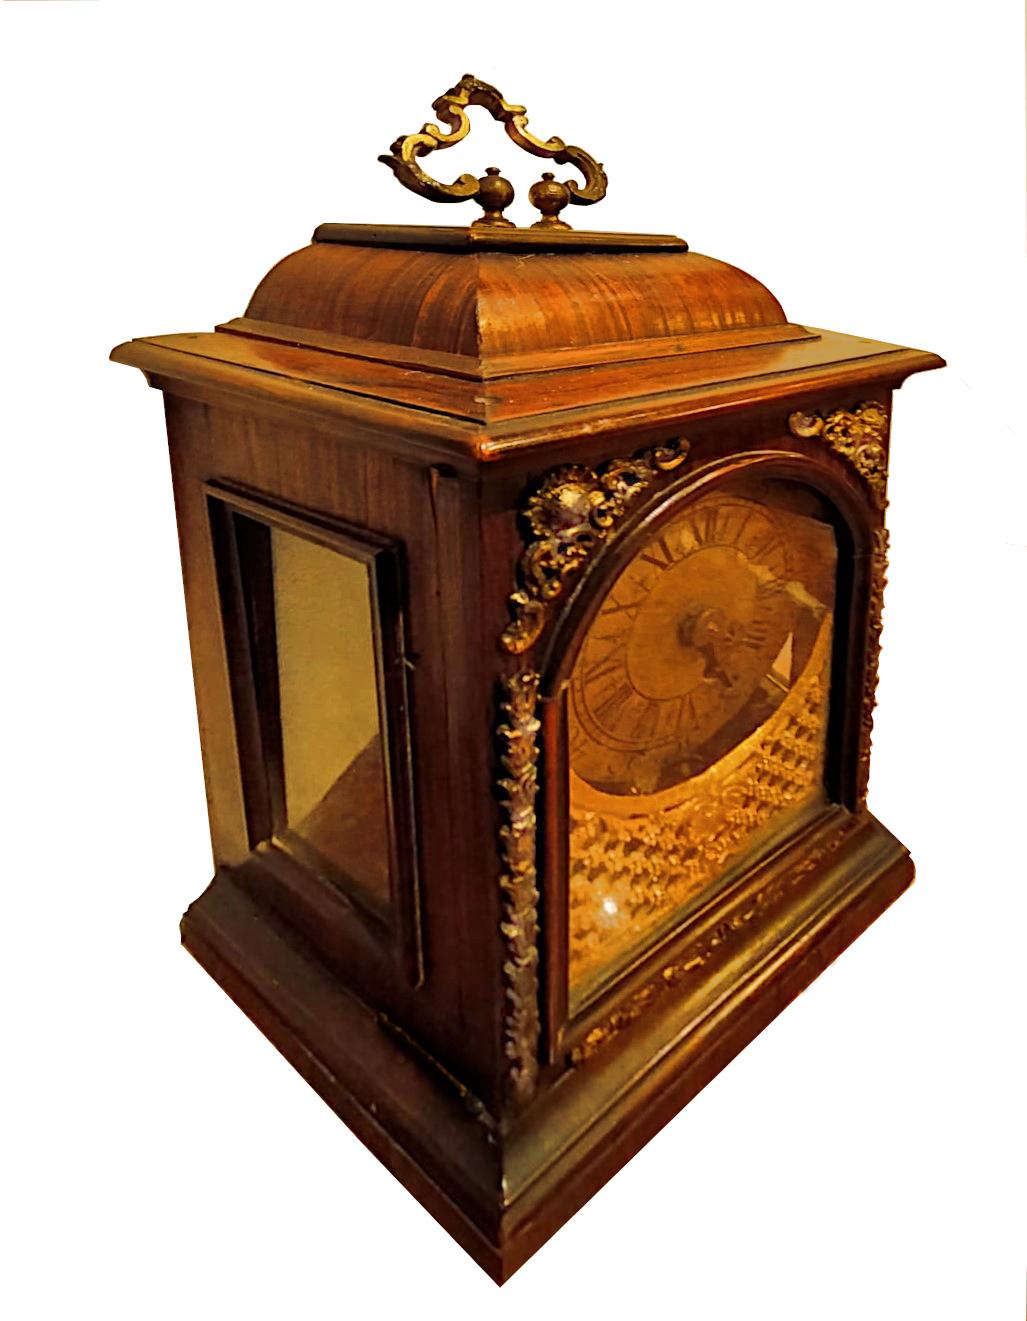 Early 1700s Italian clock (Rome).

Beautiful table clock from the early 1700s, made of rosewood panelled wood and gilded bronzes.
Measurements: width cm 27, depth cm 13.5 - height cm 39 
Both cabinet and mechanism to be restored

No. 10436
(sm) - D

